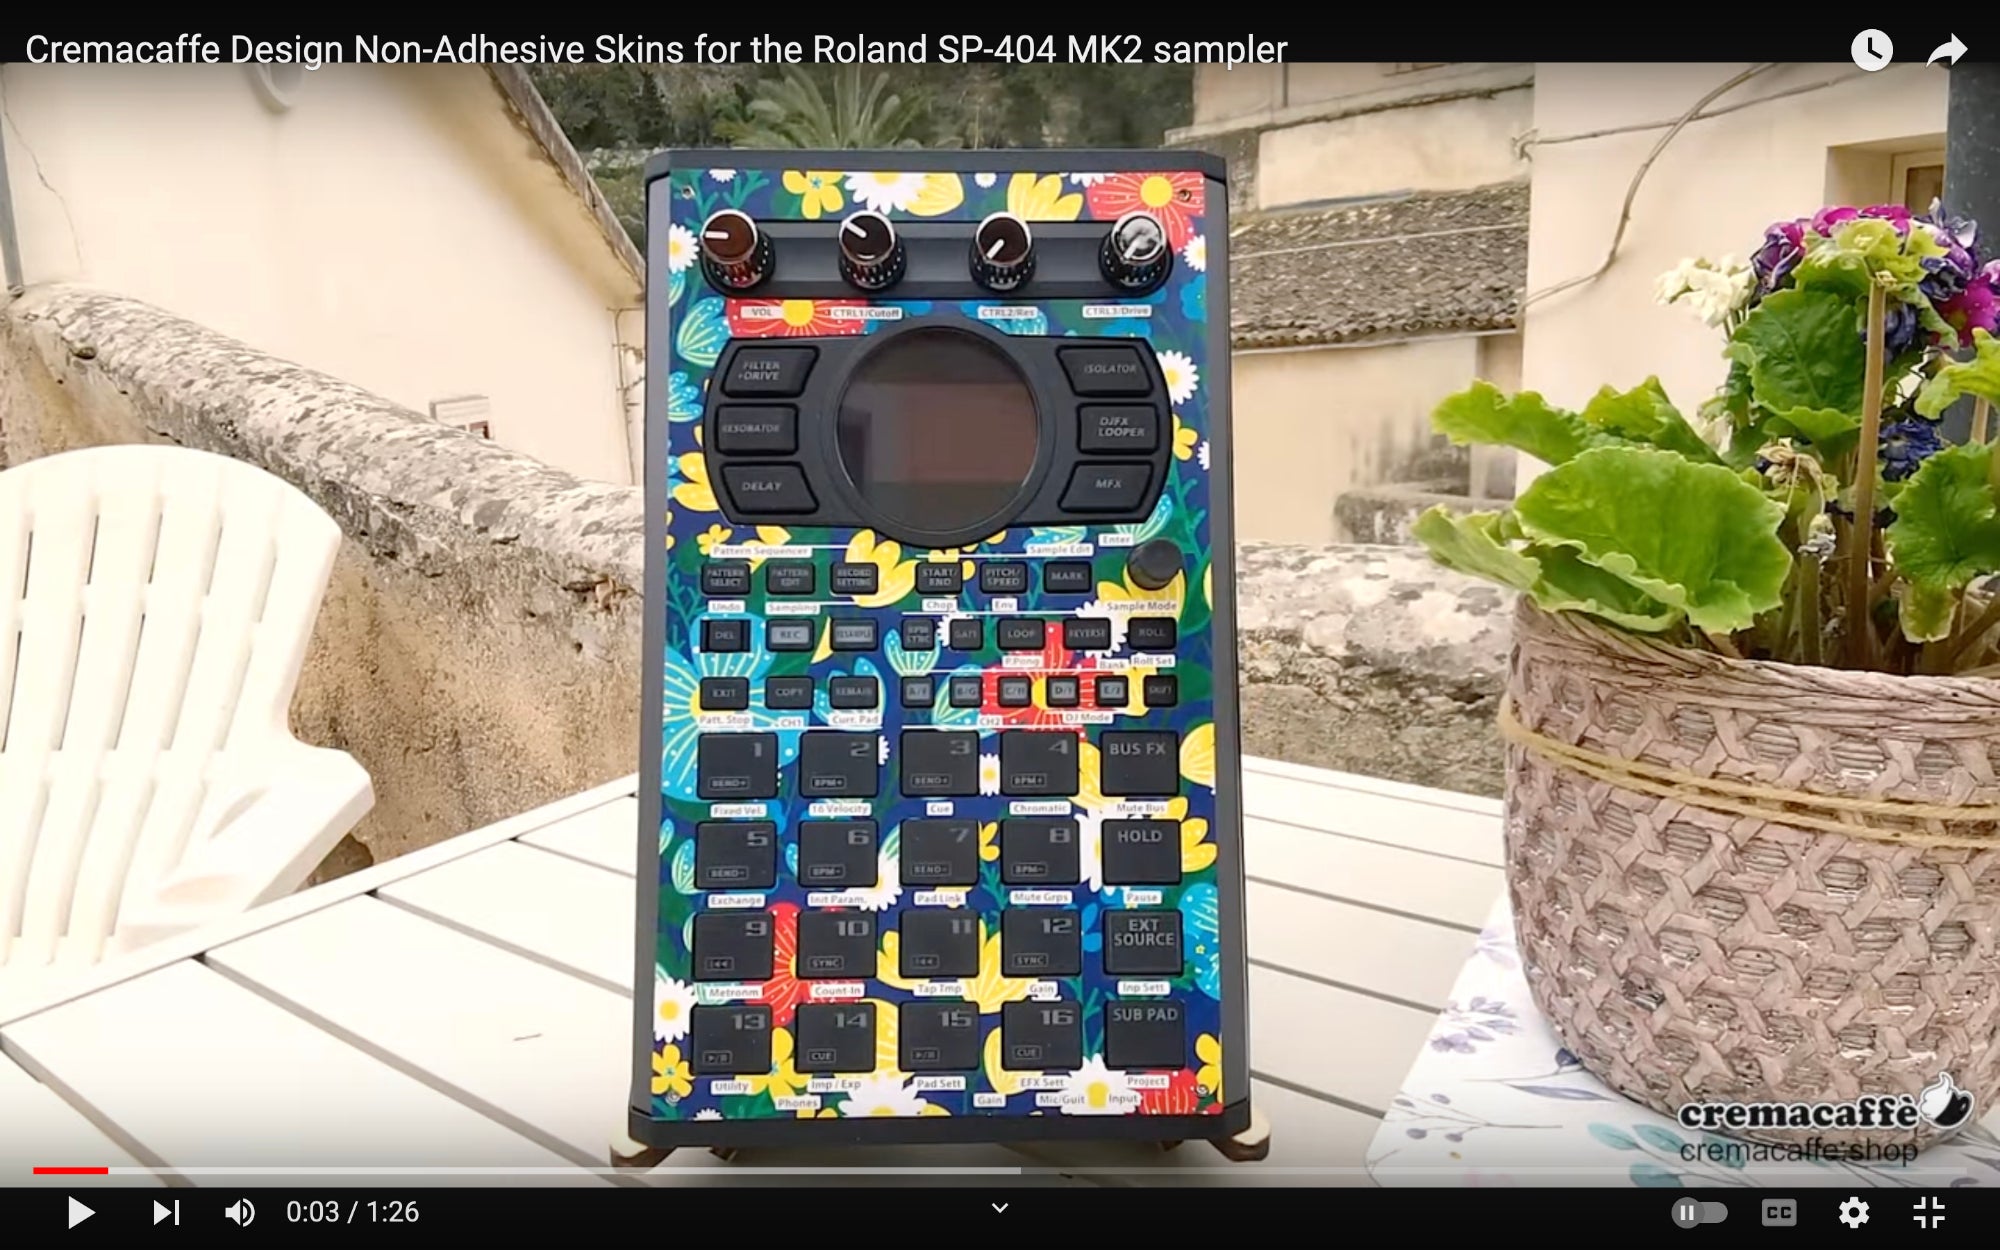 Load video: Cremacaffe Design Non-Adhesive Skins for the Roland SP-404 MK2 sampler